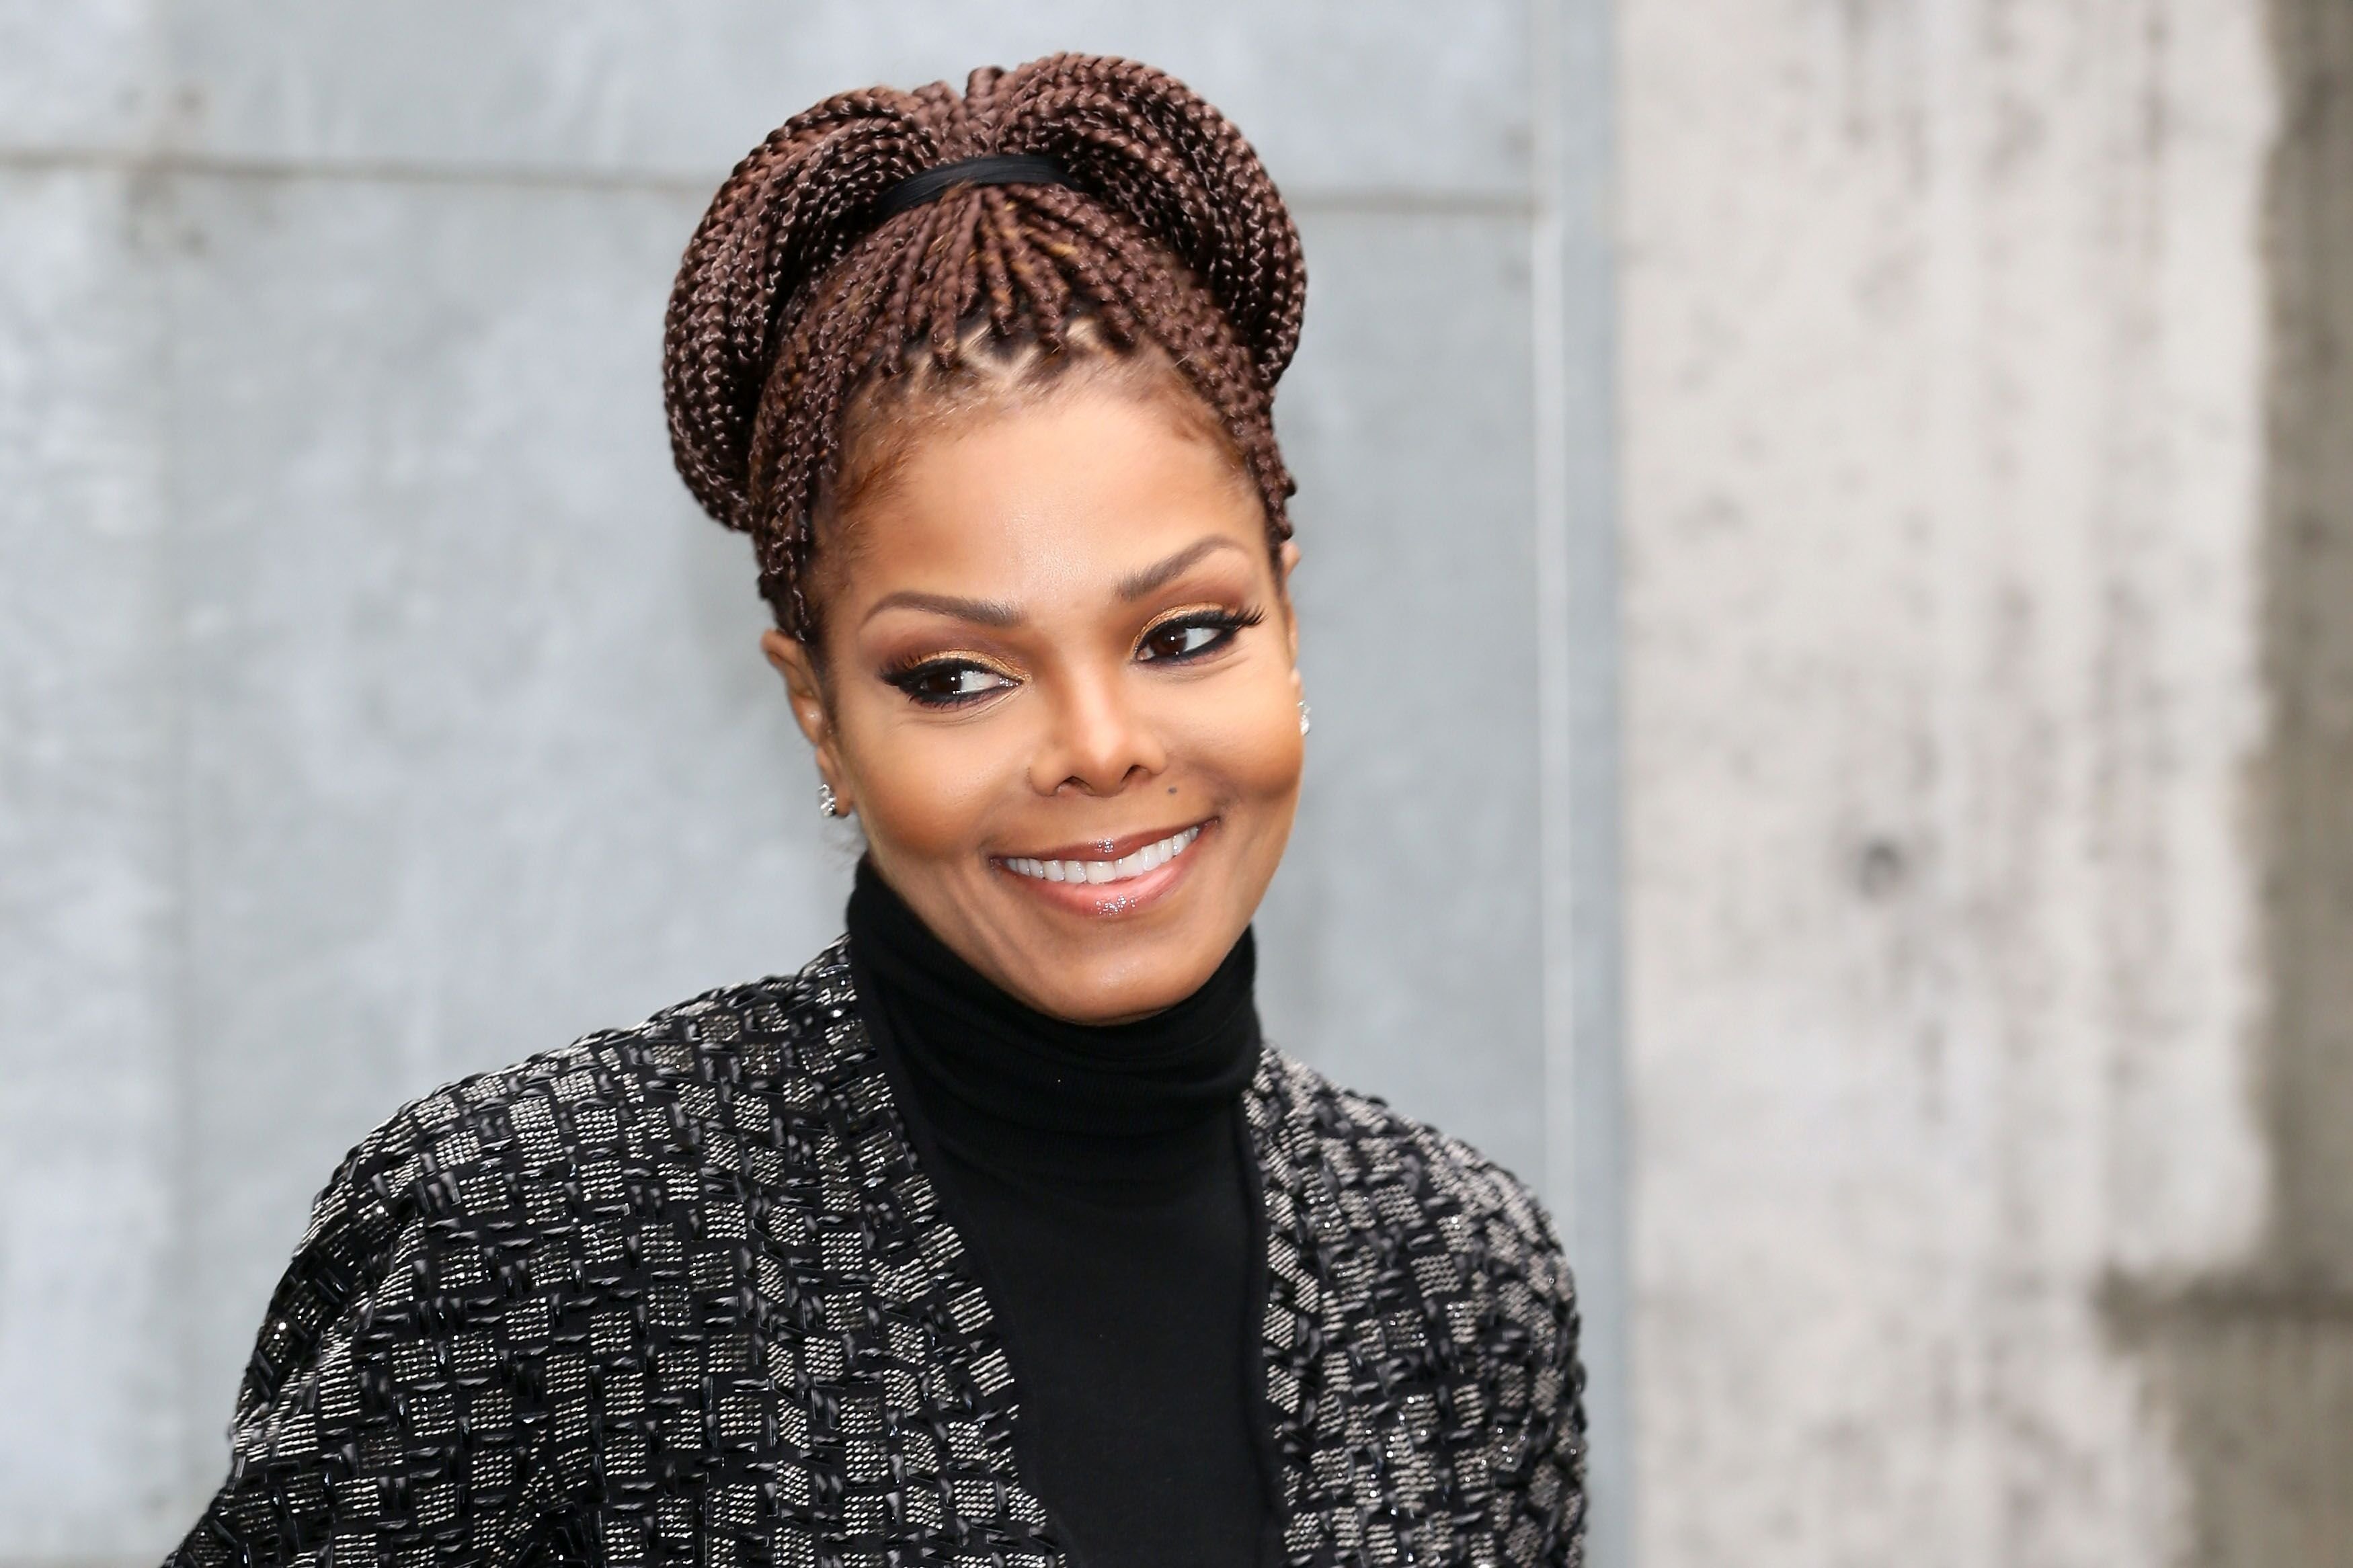 Janet Jackson attends the Giorgio Armani fashion show as part of Milan Fashion Week Womenswear Fall/Winter 2013/14 on February 25, 2014 in Milan, Italy | Photo: Getty Images